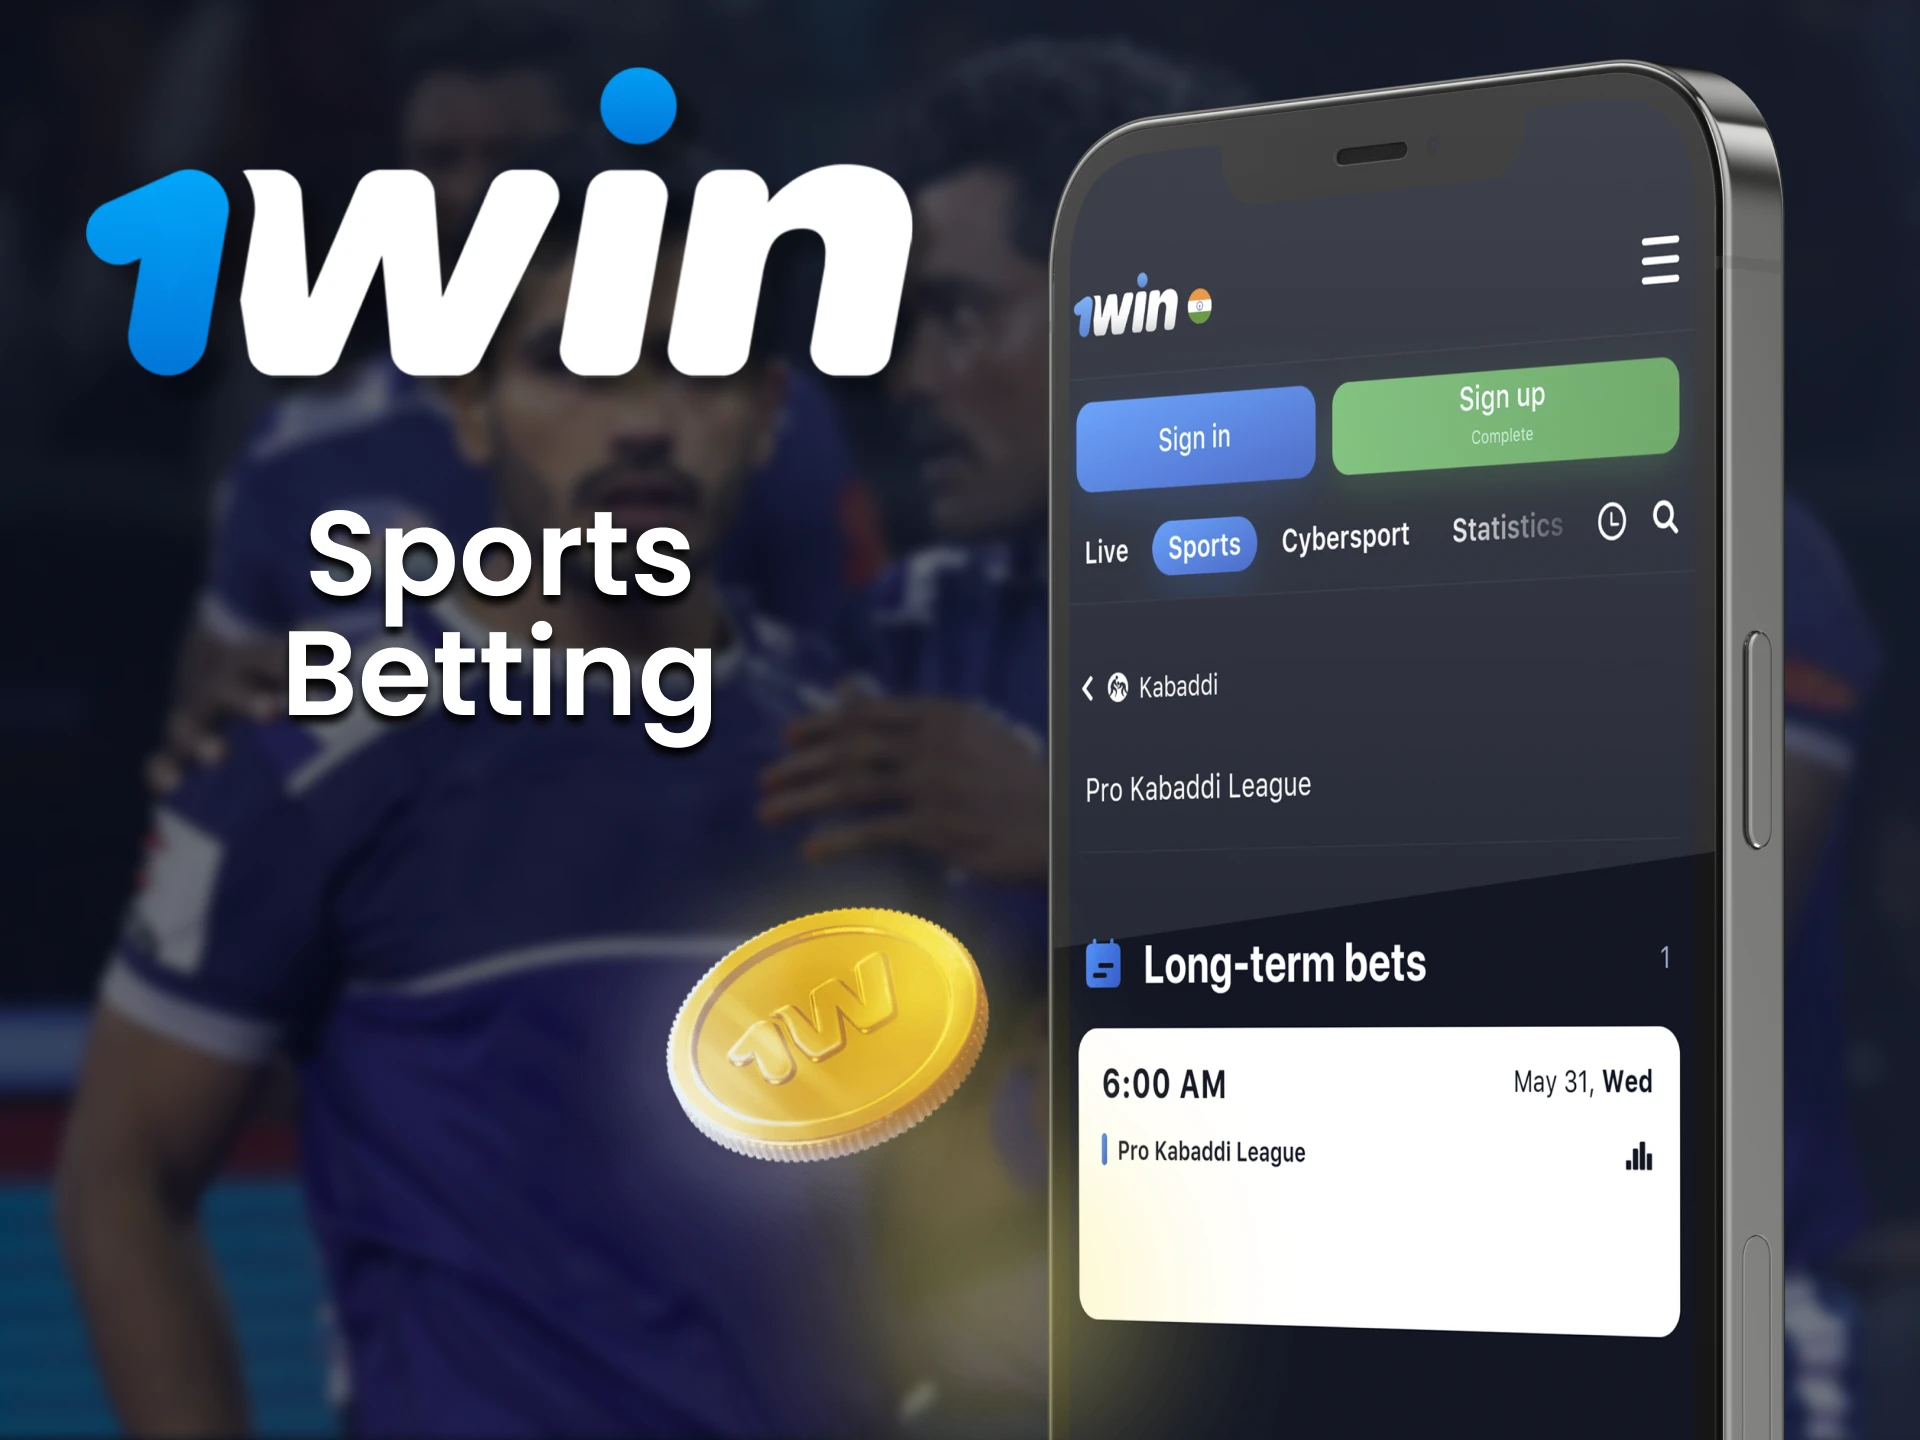 Bet on your favorite sports with the 1win app.